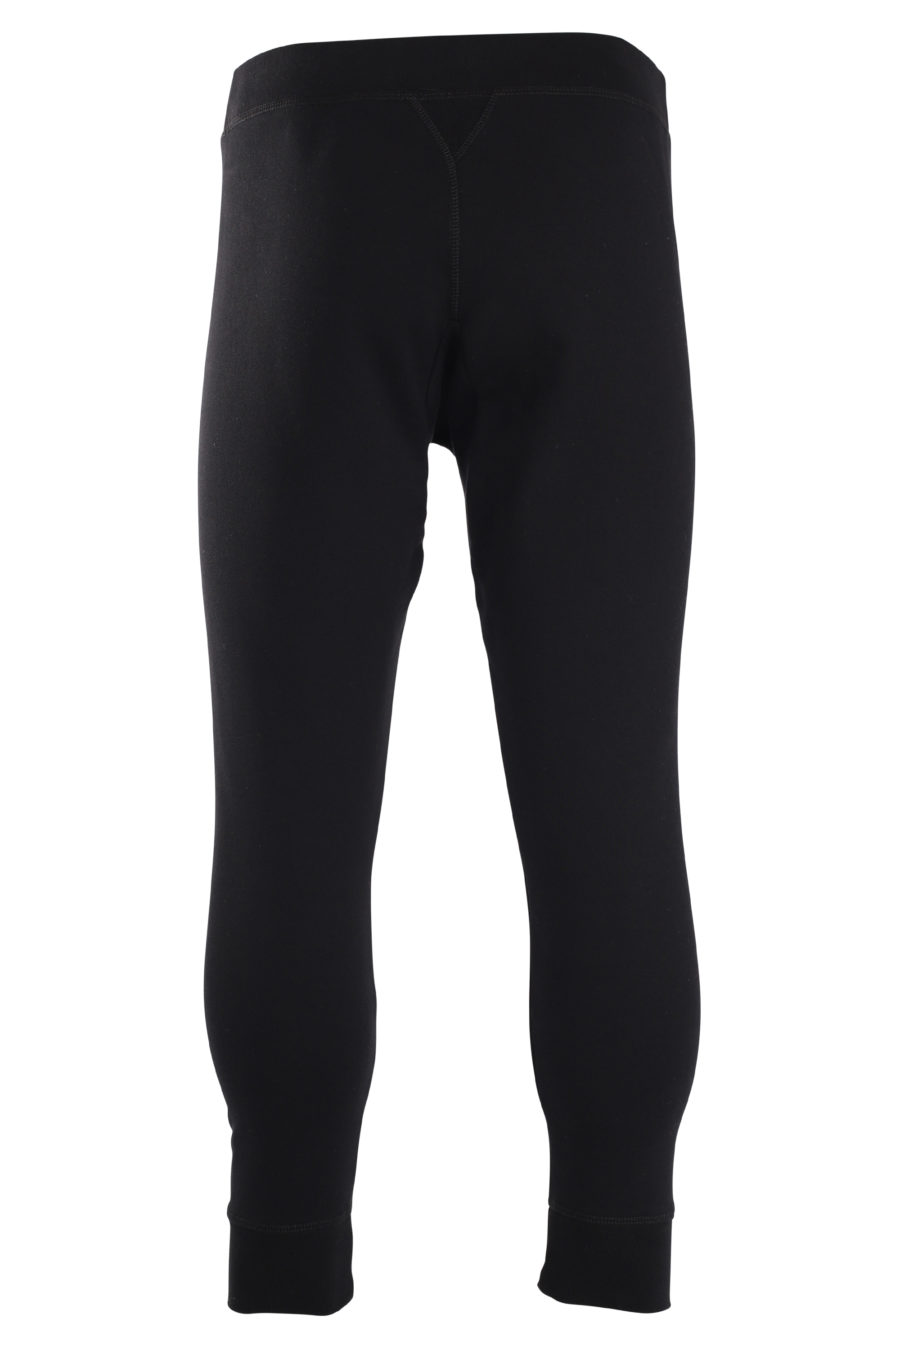 Tracksuit bottoms black with front "icon" logo - IMG 0016